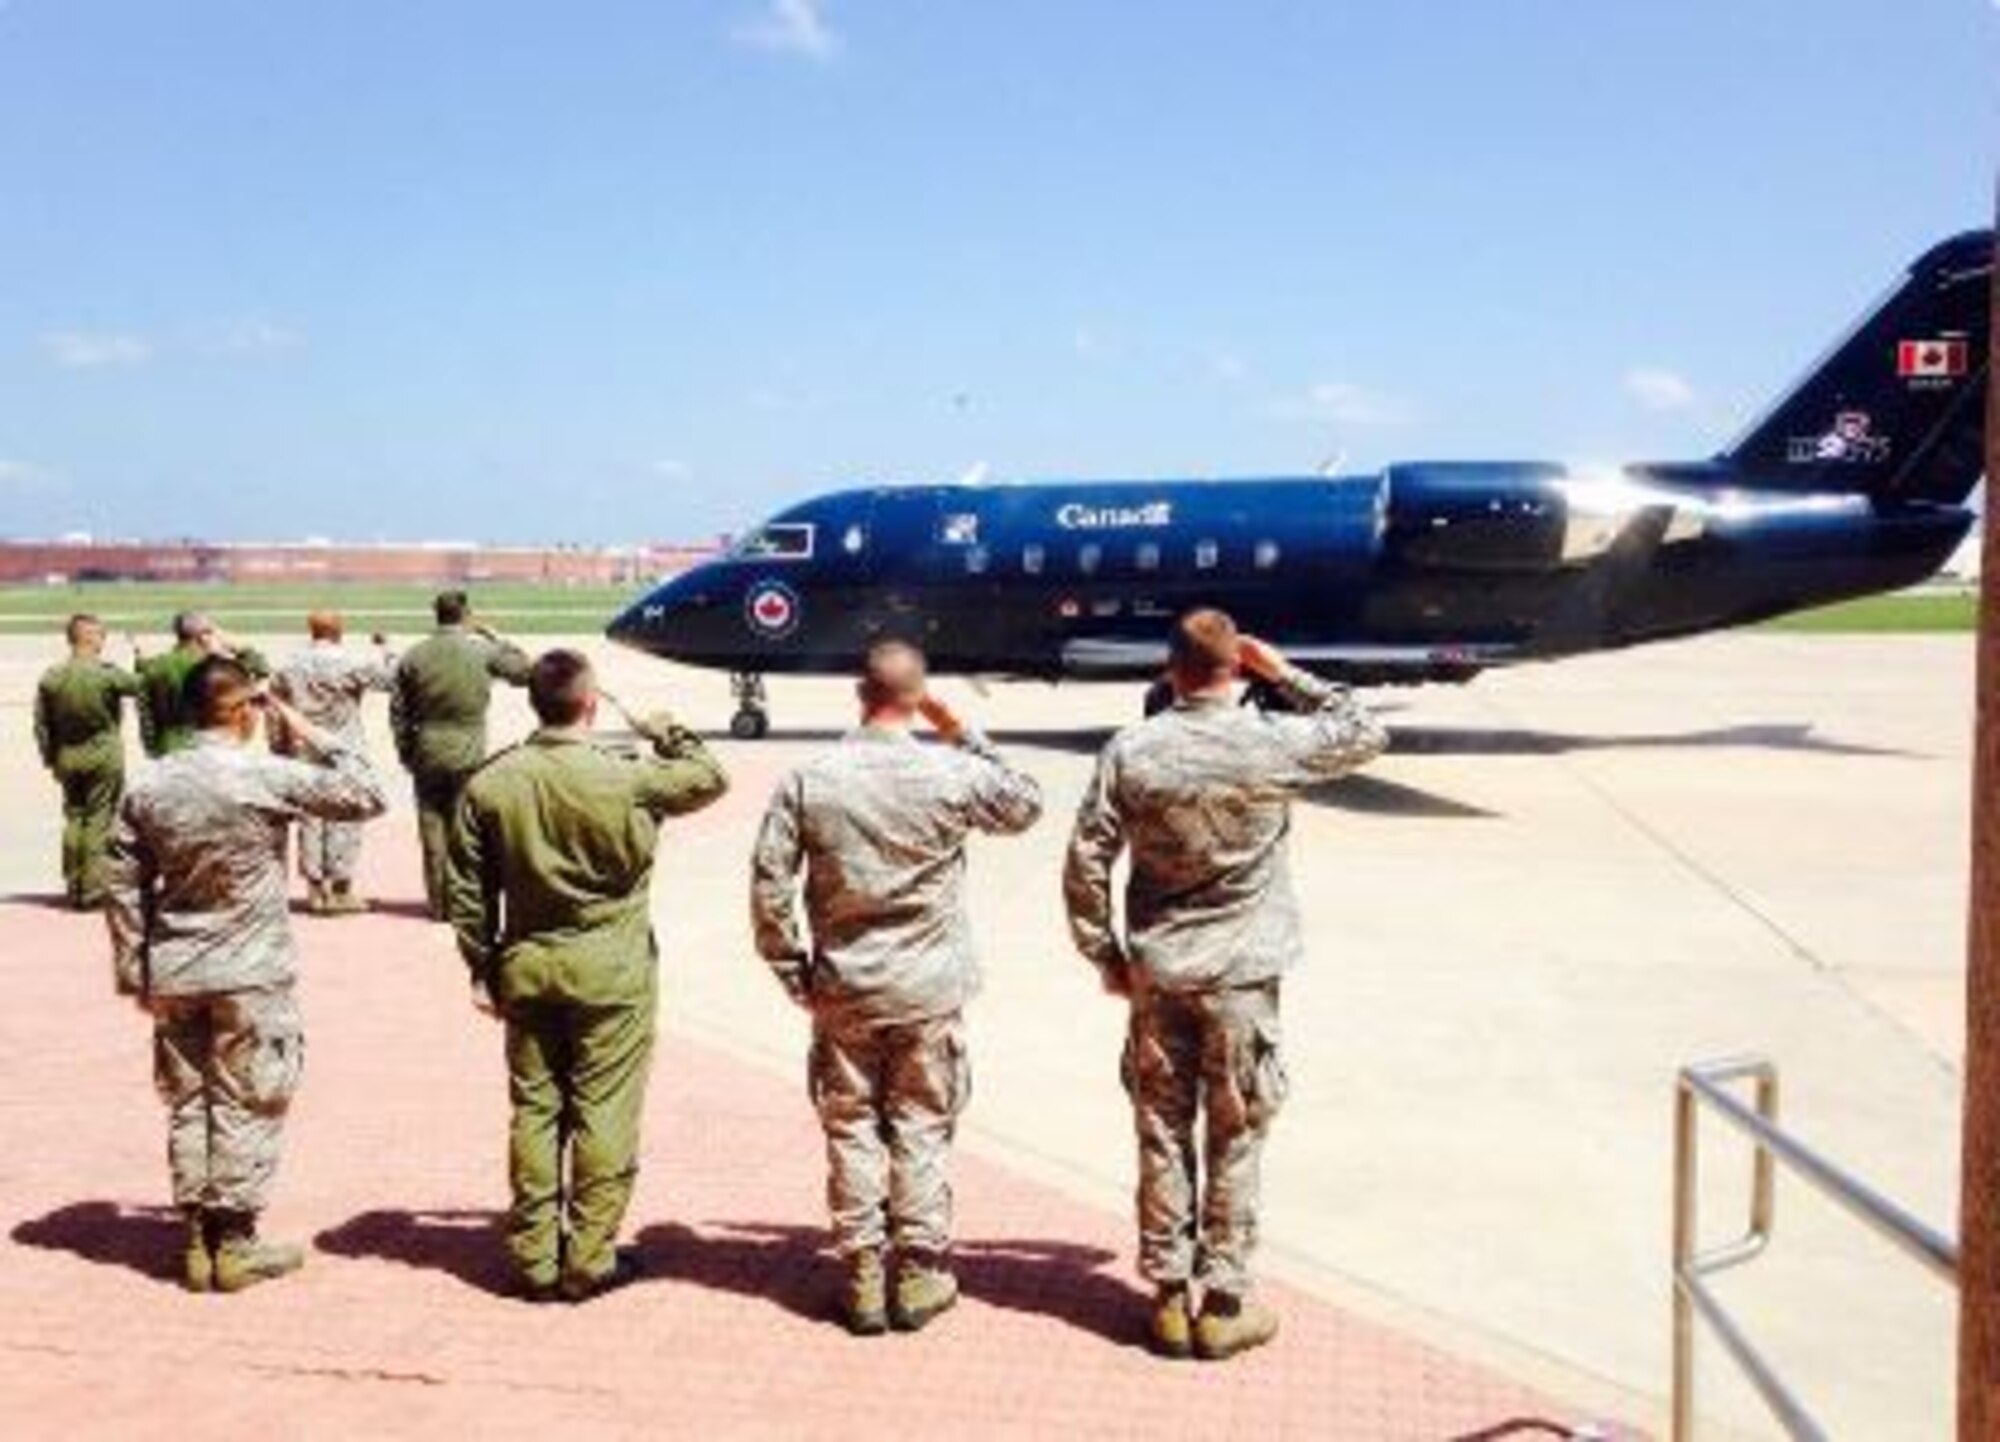 Members of the 552nd Air Control Wing and the Canadian Detachment salute as the Royal Canadian Air Force commander visits Tinker Air Force Base.